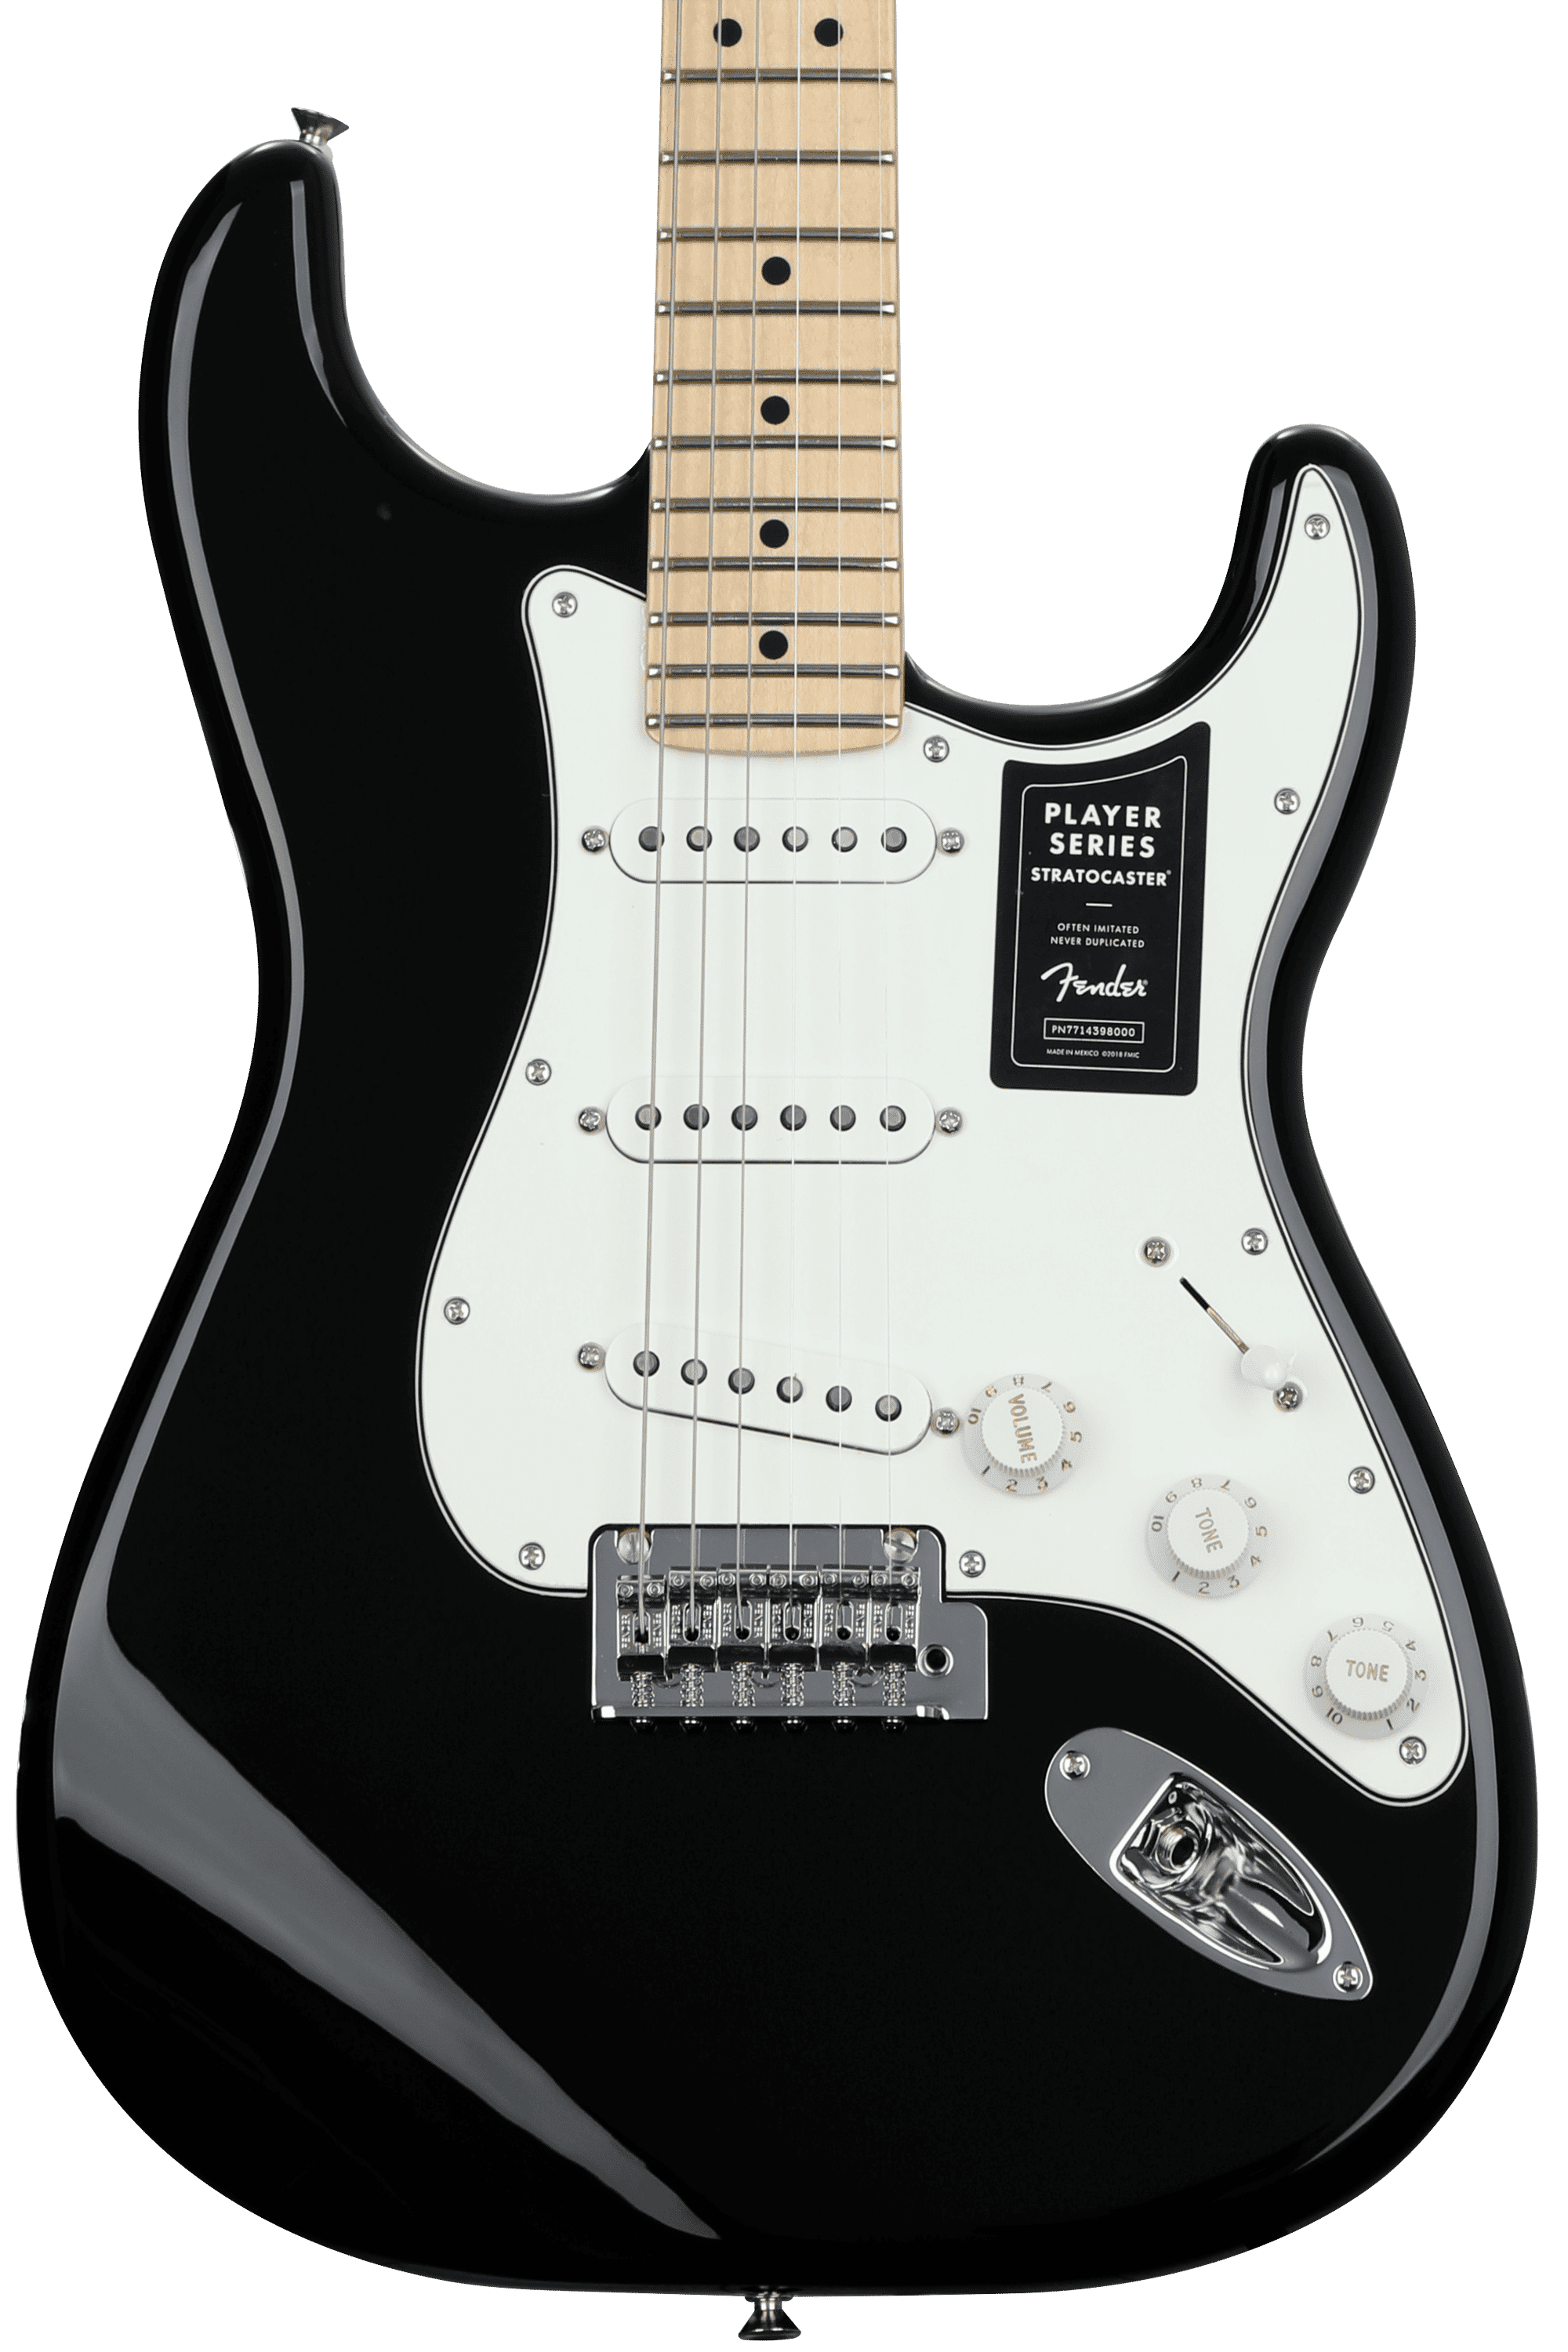 Fender Player Stratocaster - Black with Maple Fingerboard